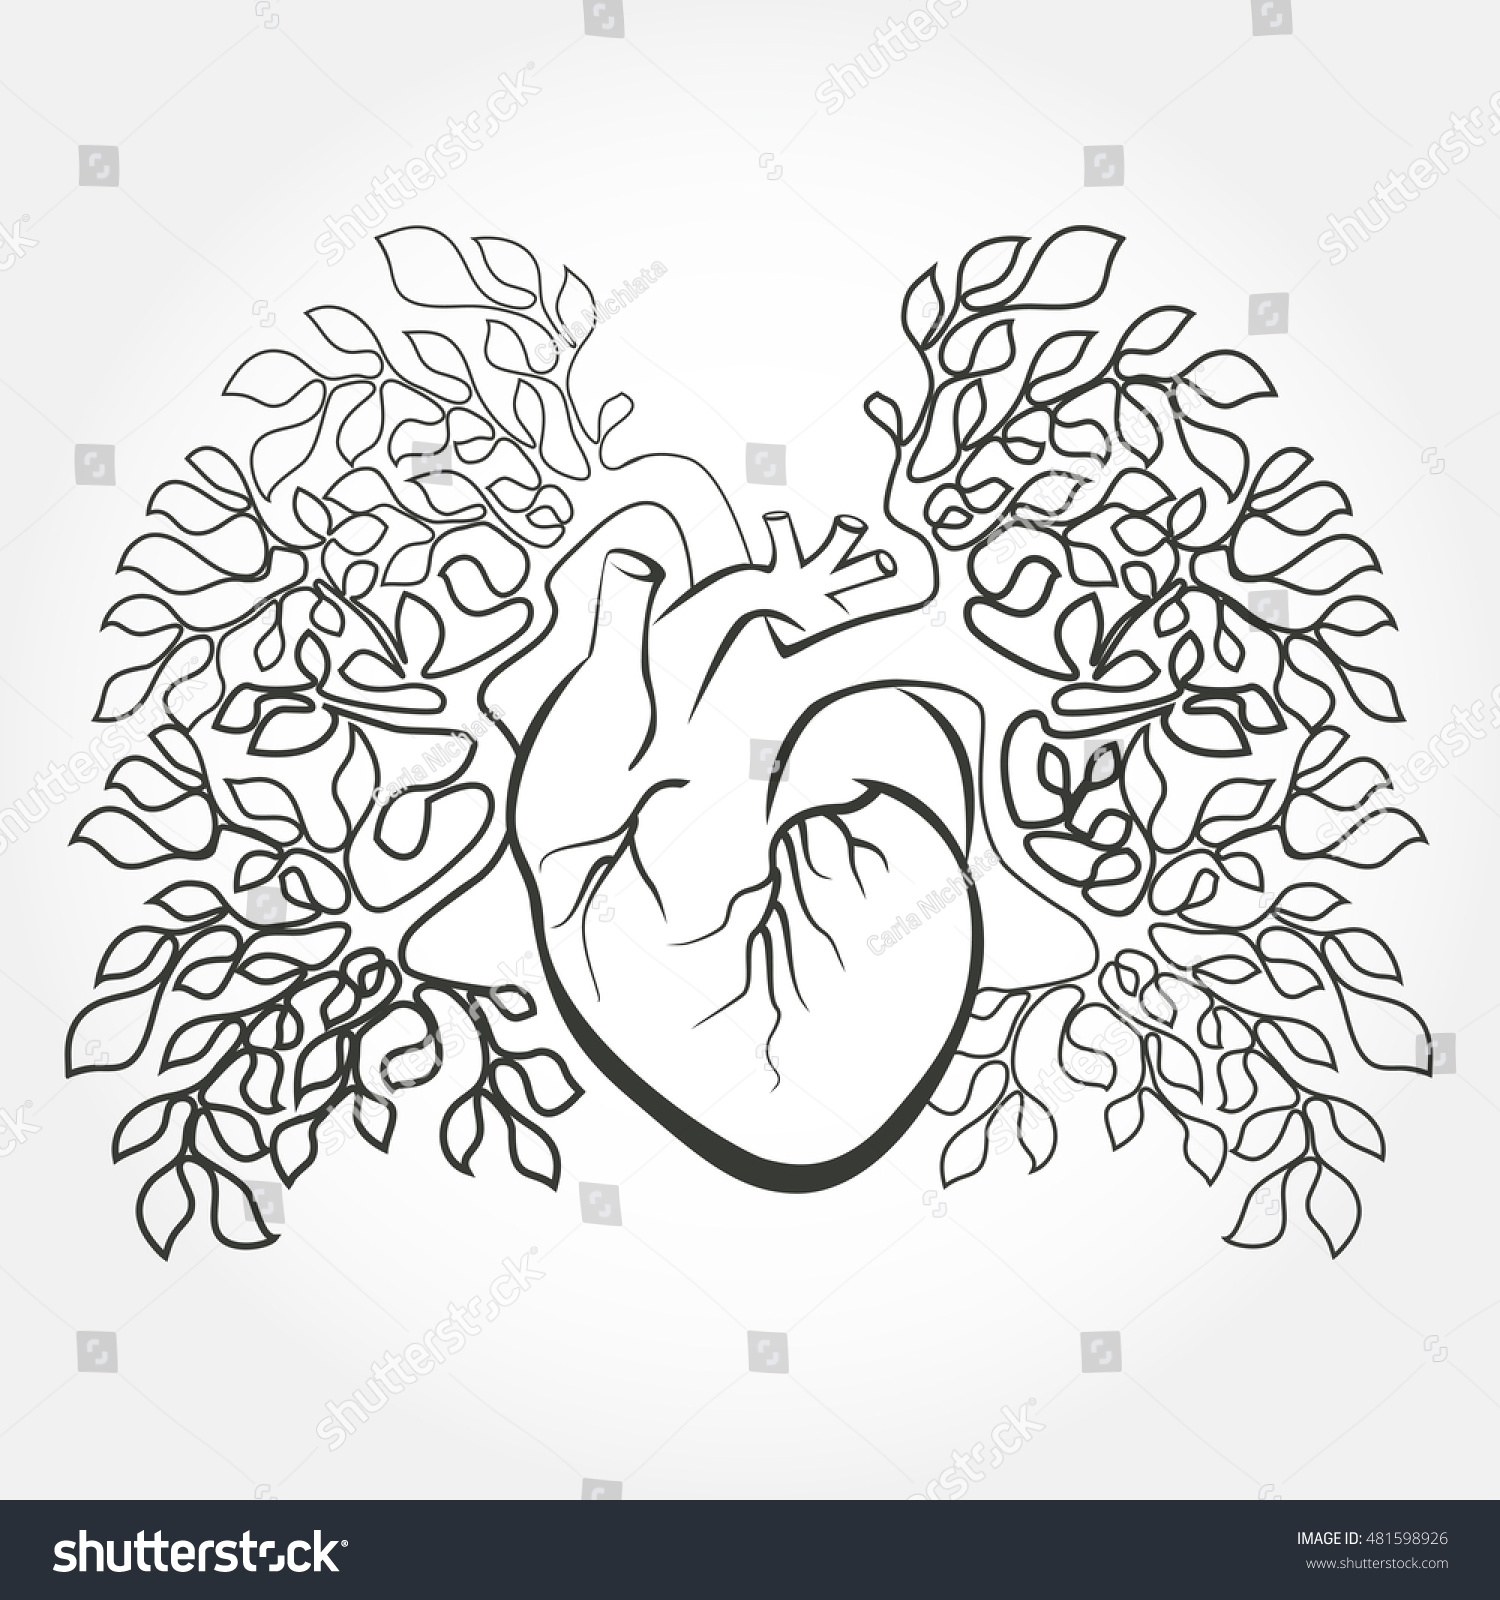 Human Heart Coloring Pages at GetColorings.com | Free printable